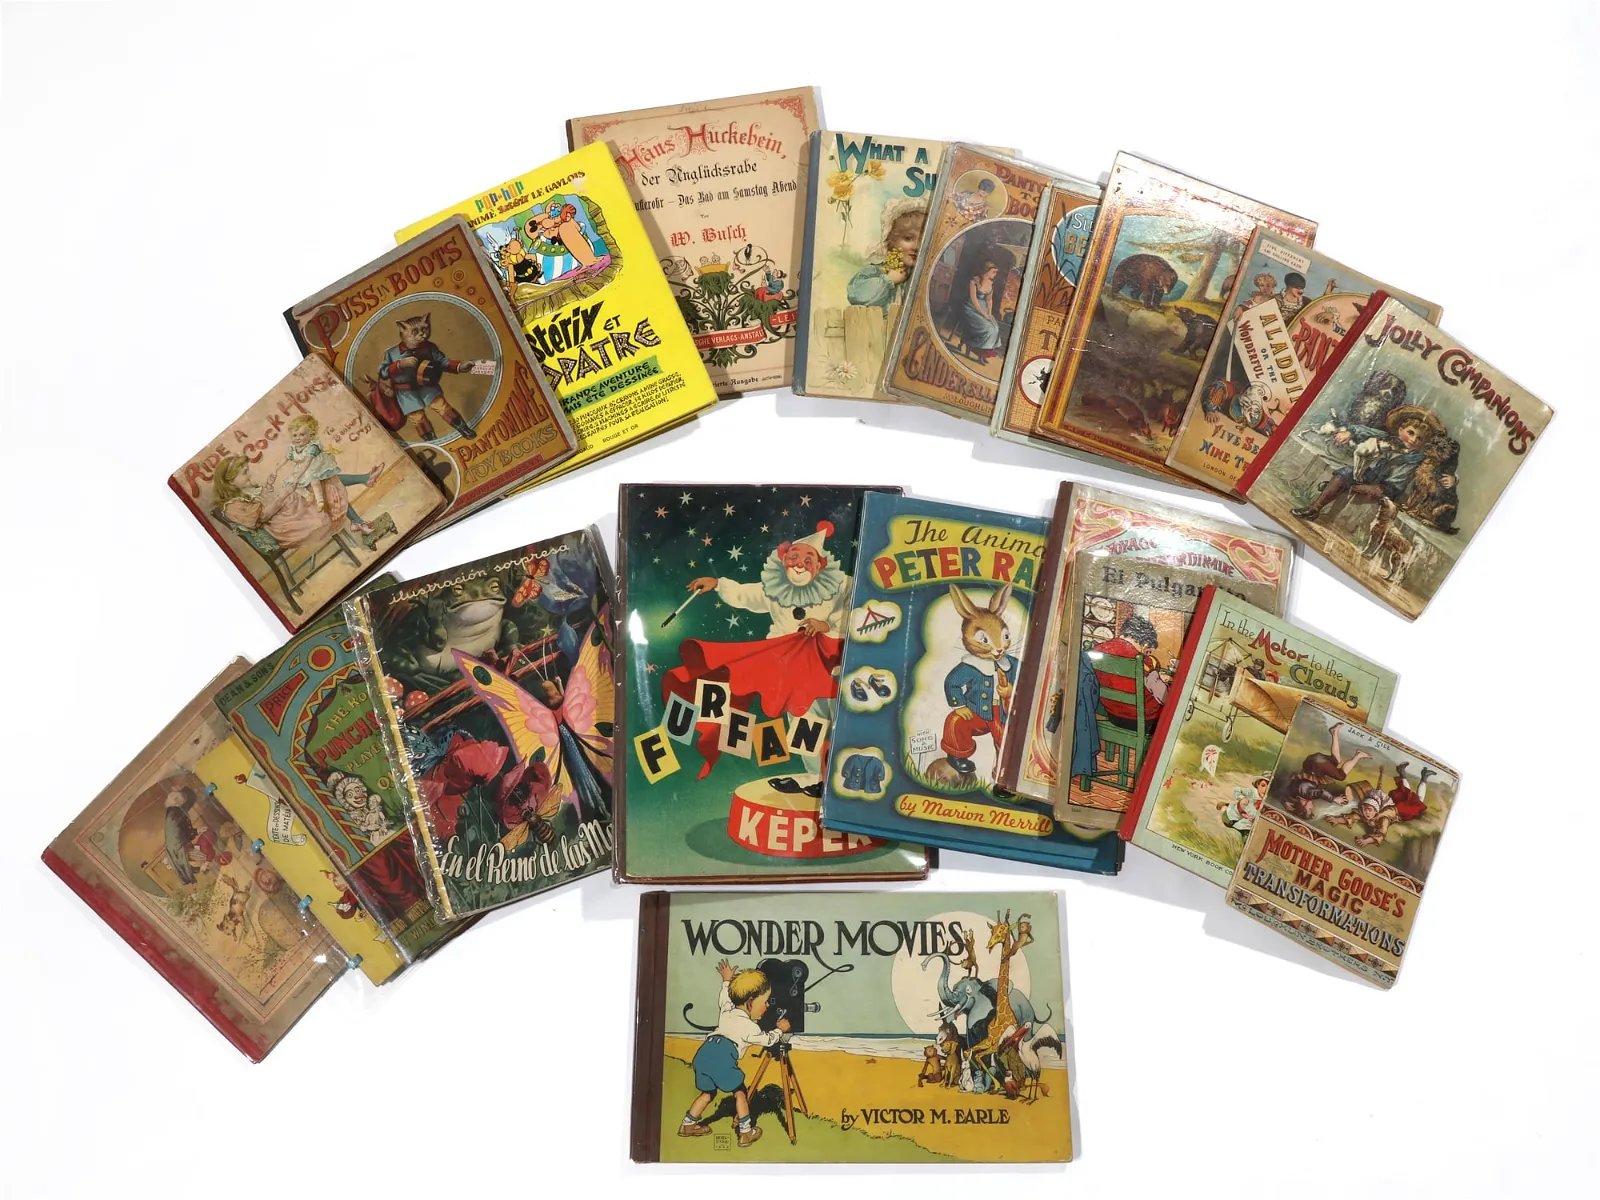 Antiquarian books for children stole the show at Andrew Jones